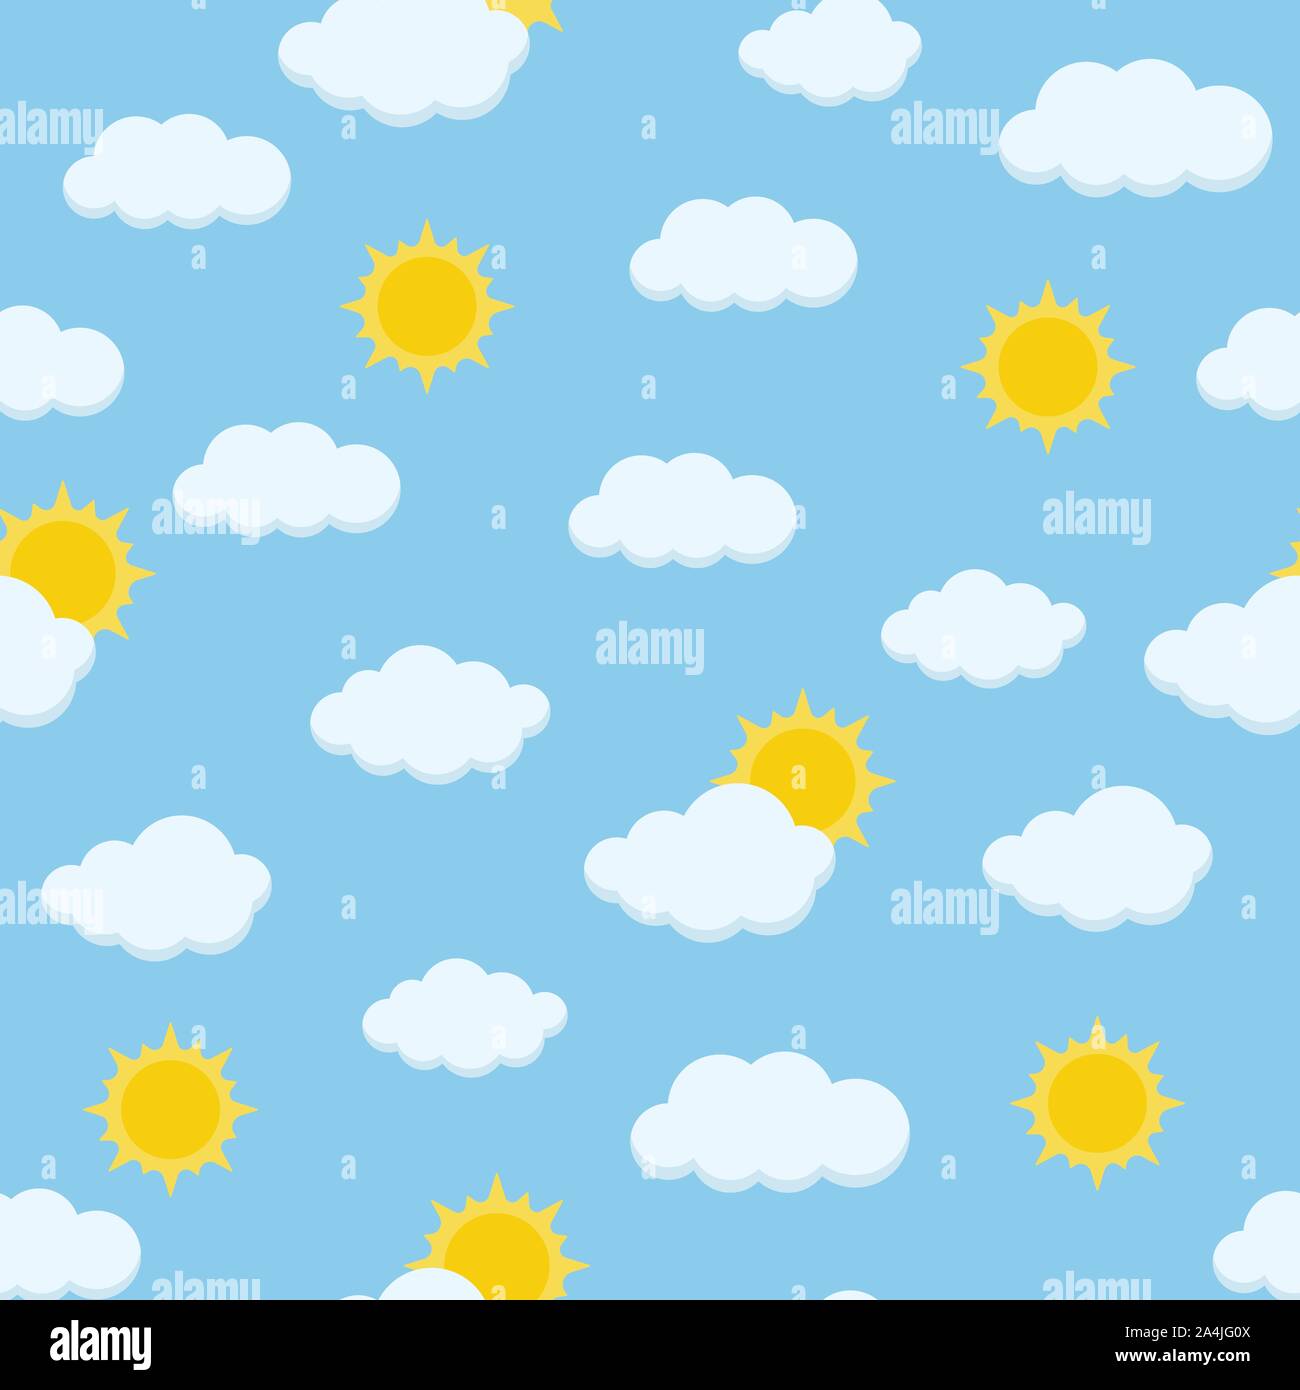 Sunny day sky cute vector seamless pattern with fluffy clouds and shining sun on the blue heaven background. Endless texture for web, covers, banners, Stock Vector